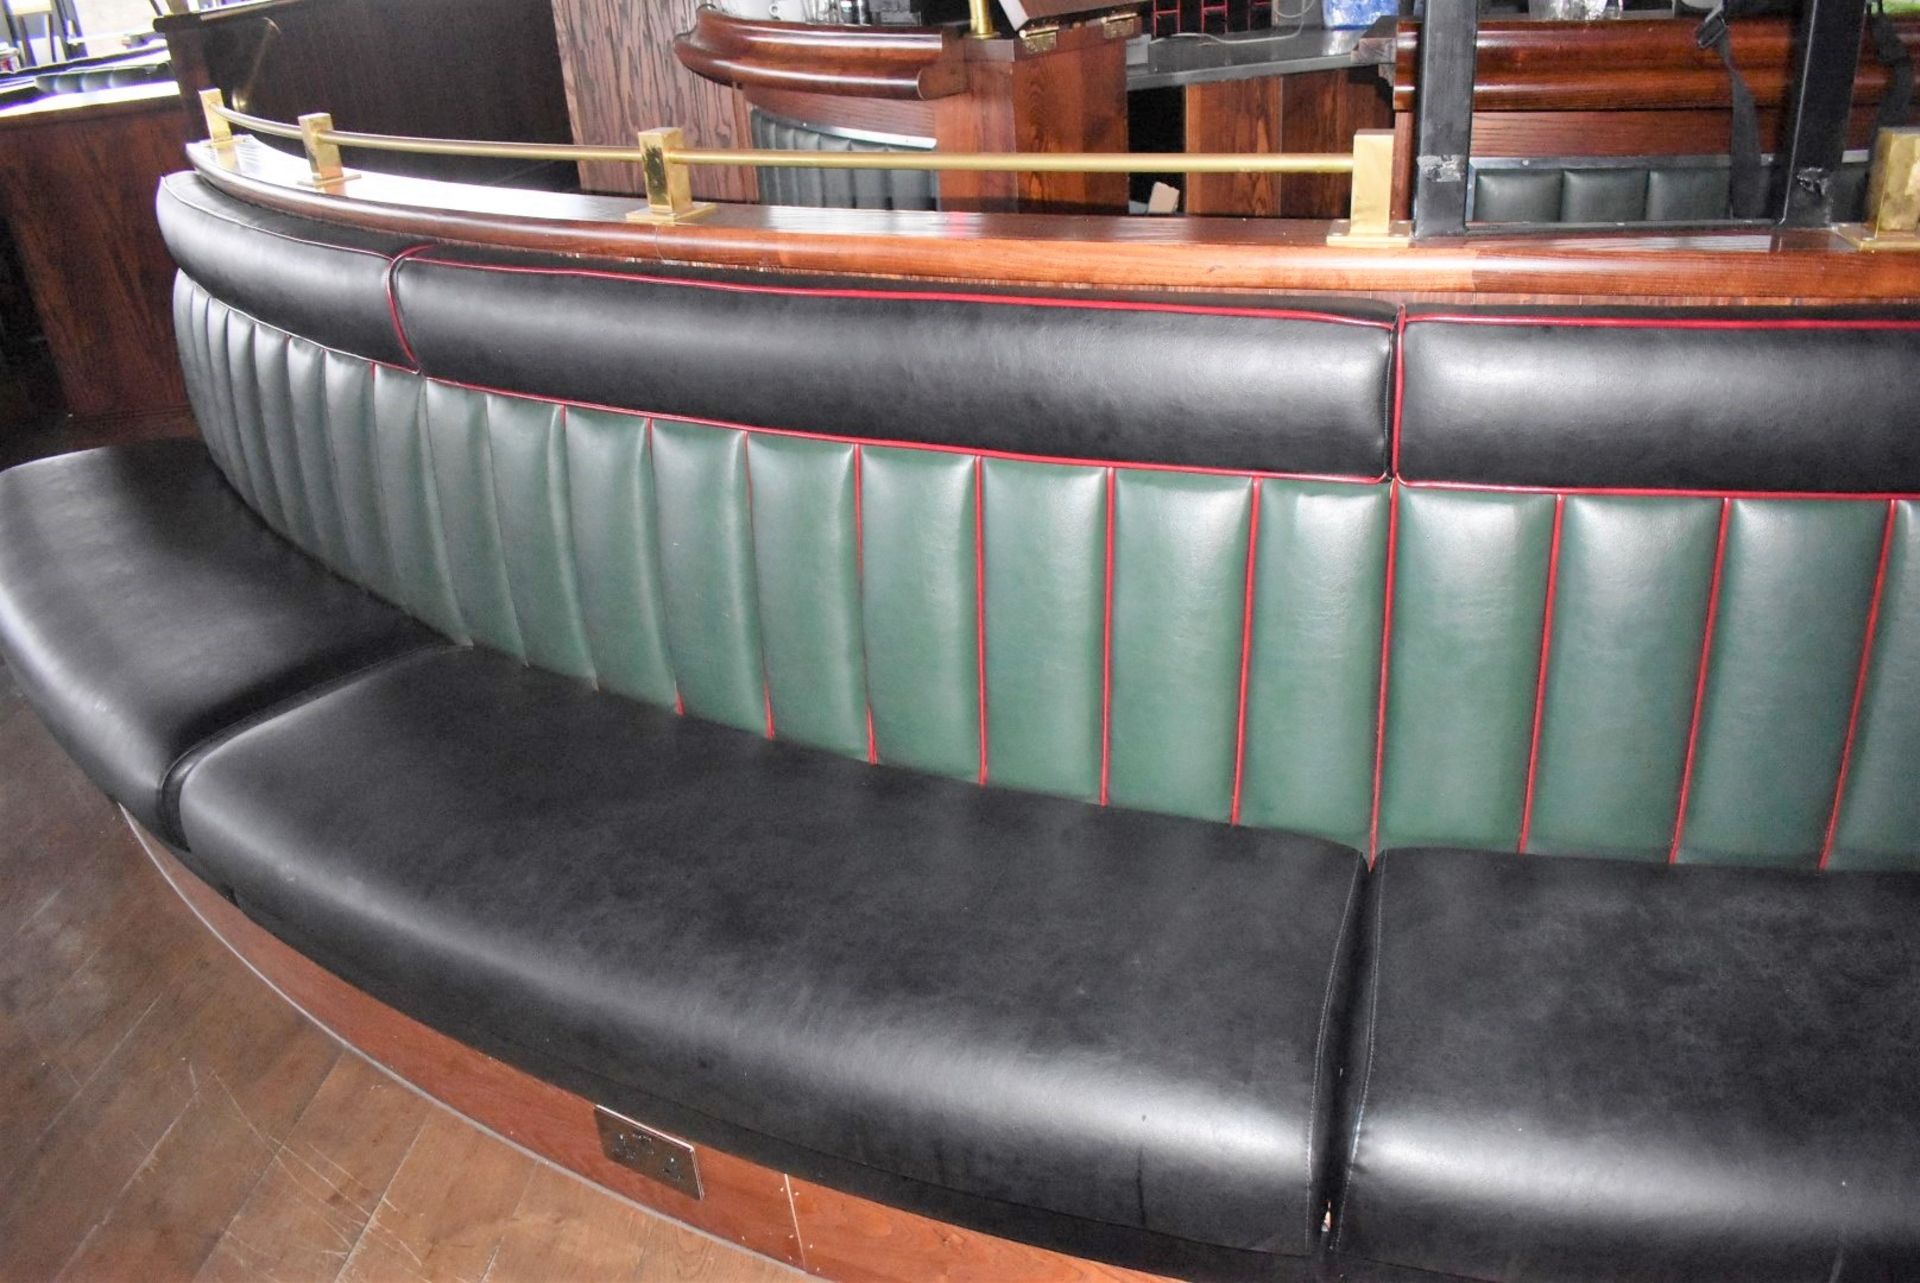 1 x Banqueting Seating Bench - 15ft in Length - Green & Black Upholstery With Vertical Fluted Back - Image 2 of 11